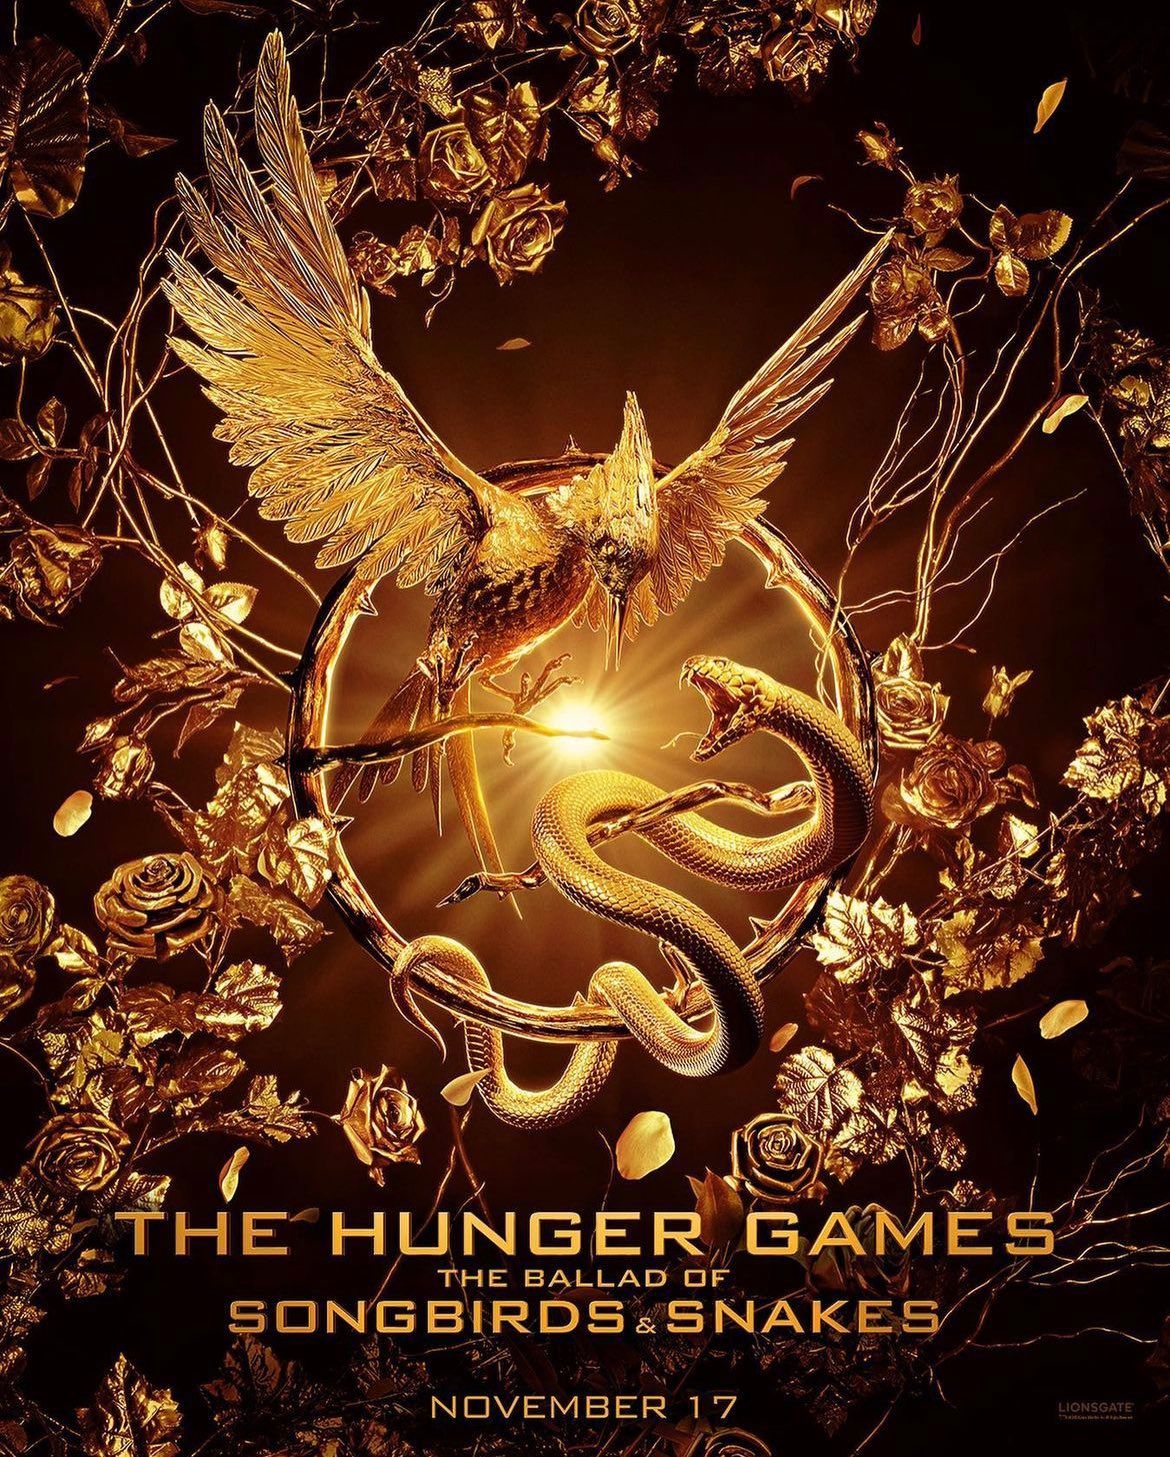 The Hunger Games: The Song of Songbirds and Snakes